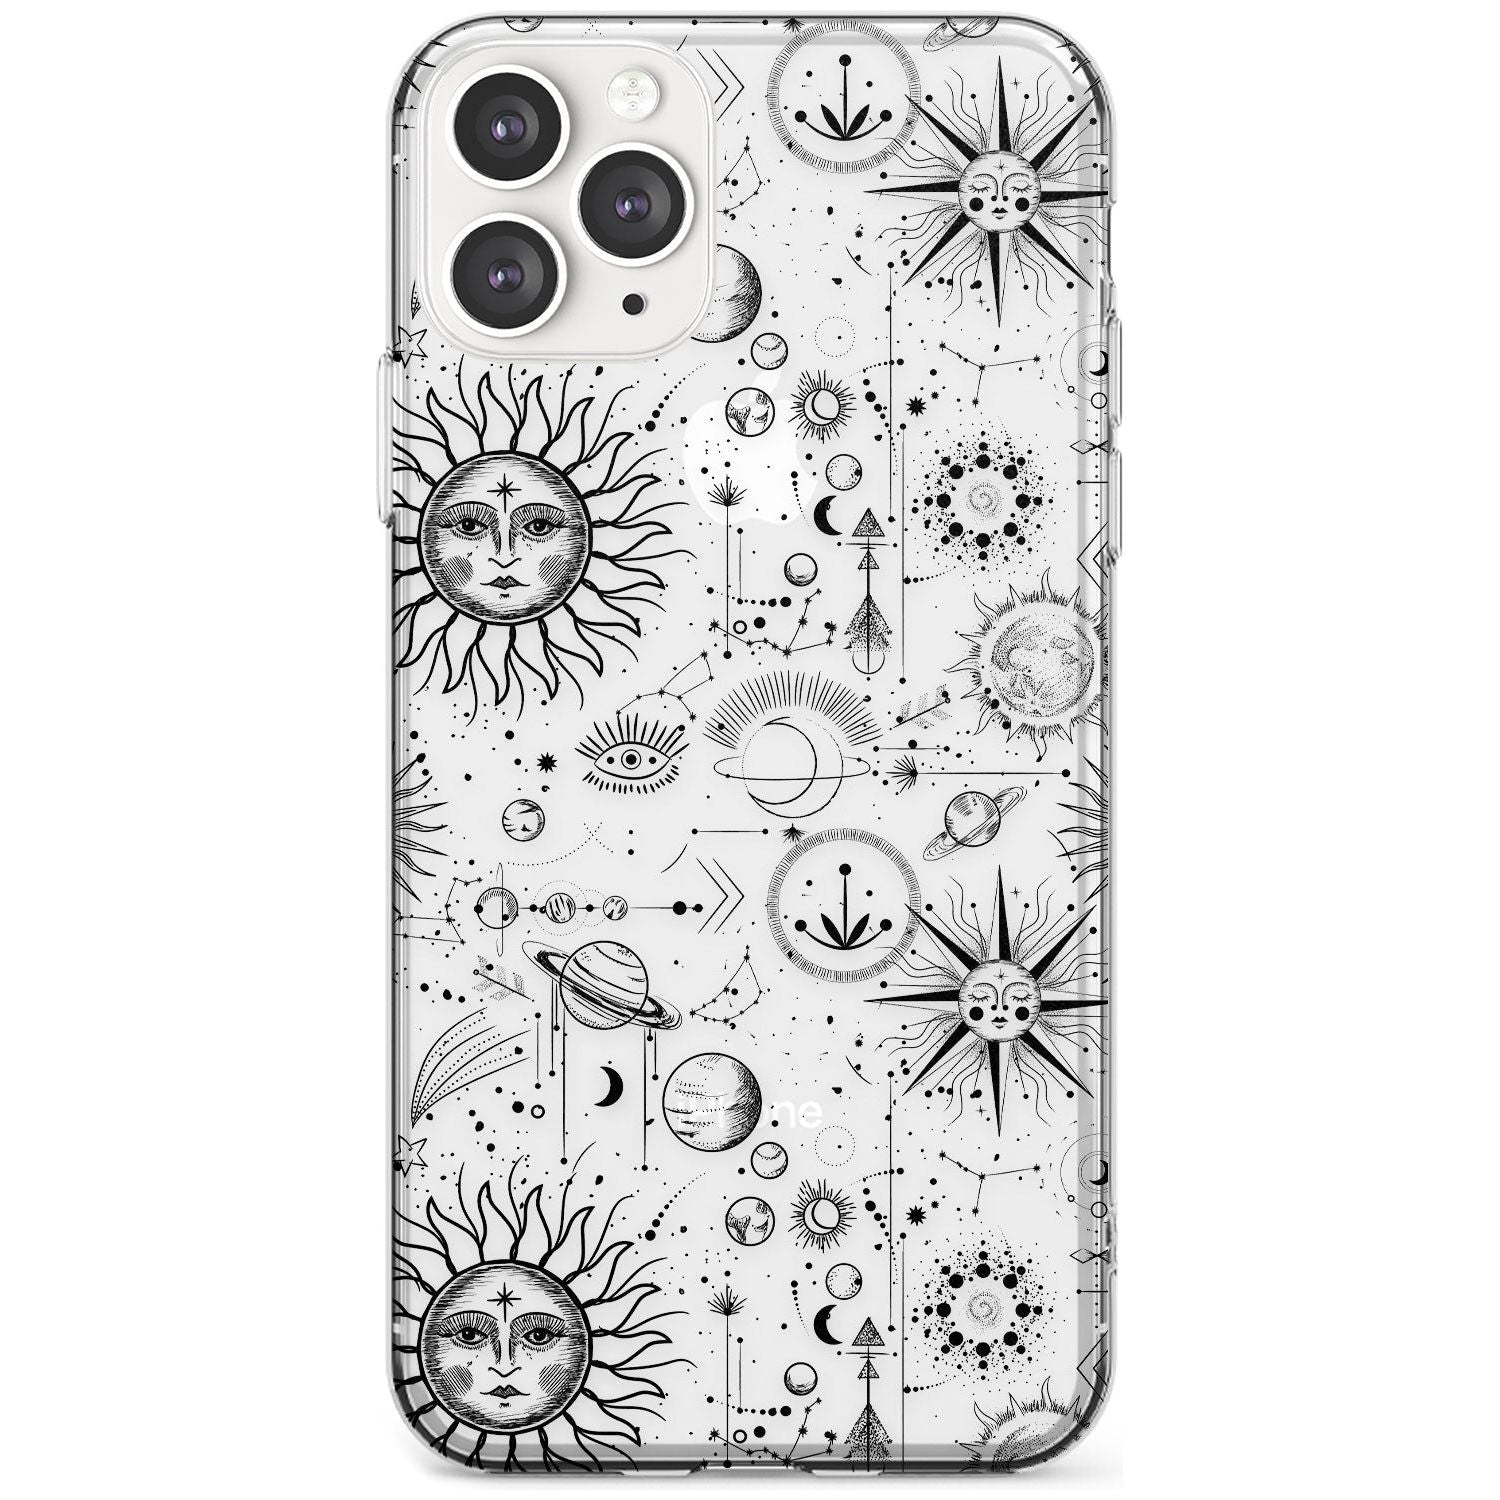 Suns & Planets Astrological Slim TPU Phone Case for iPhone 11 Pro Max